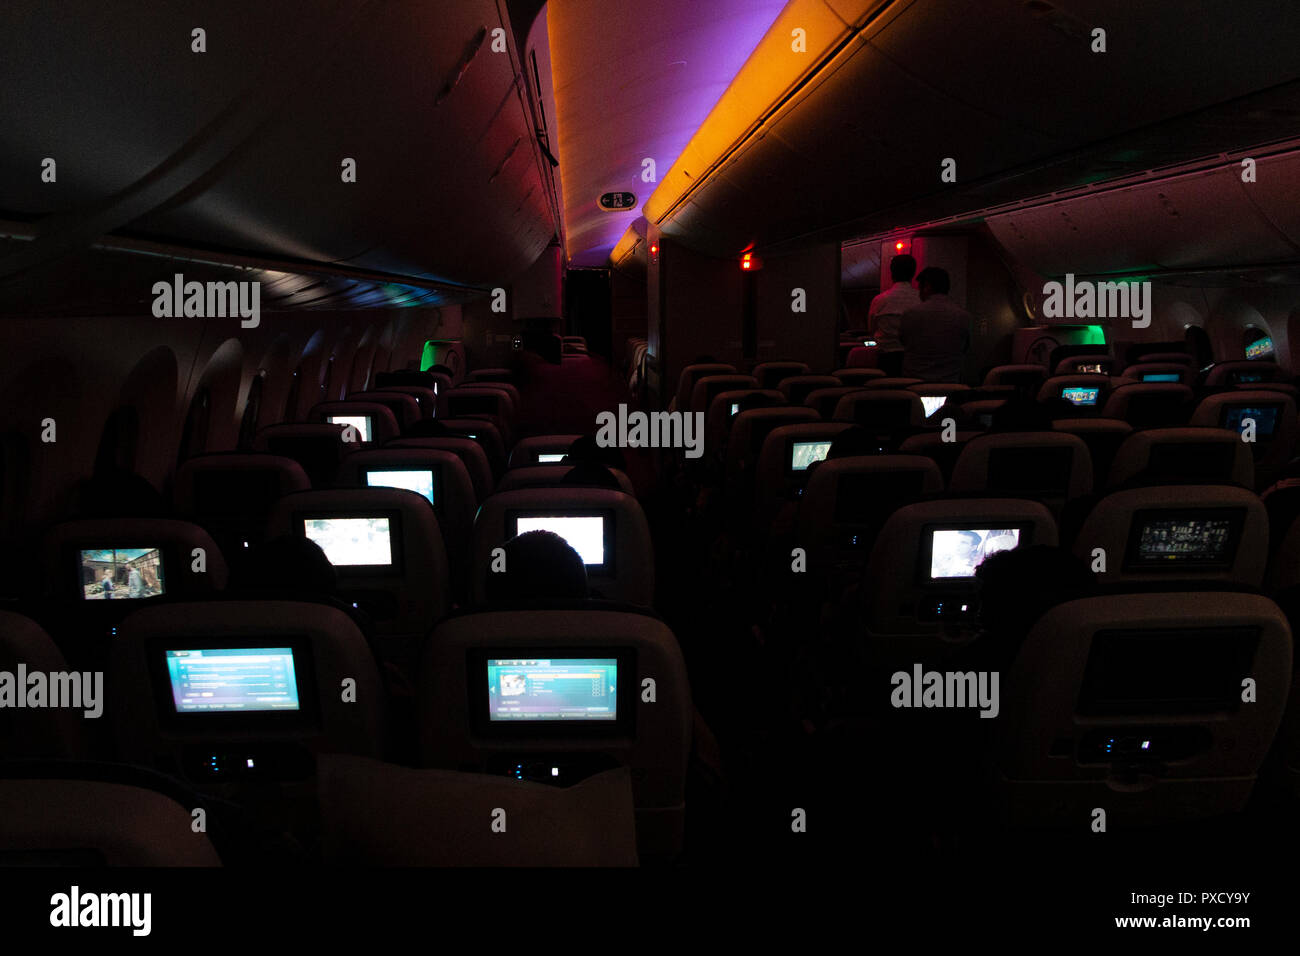 Video screens light up the interior of a long haul flight on a BA777 at night Stock Photo